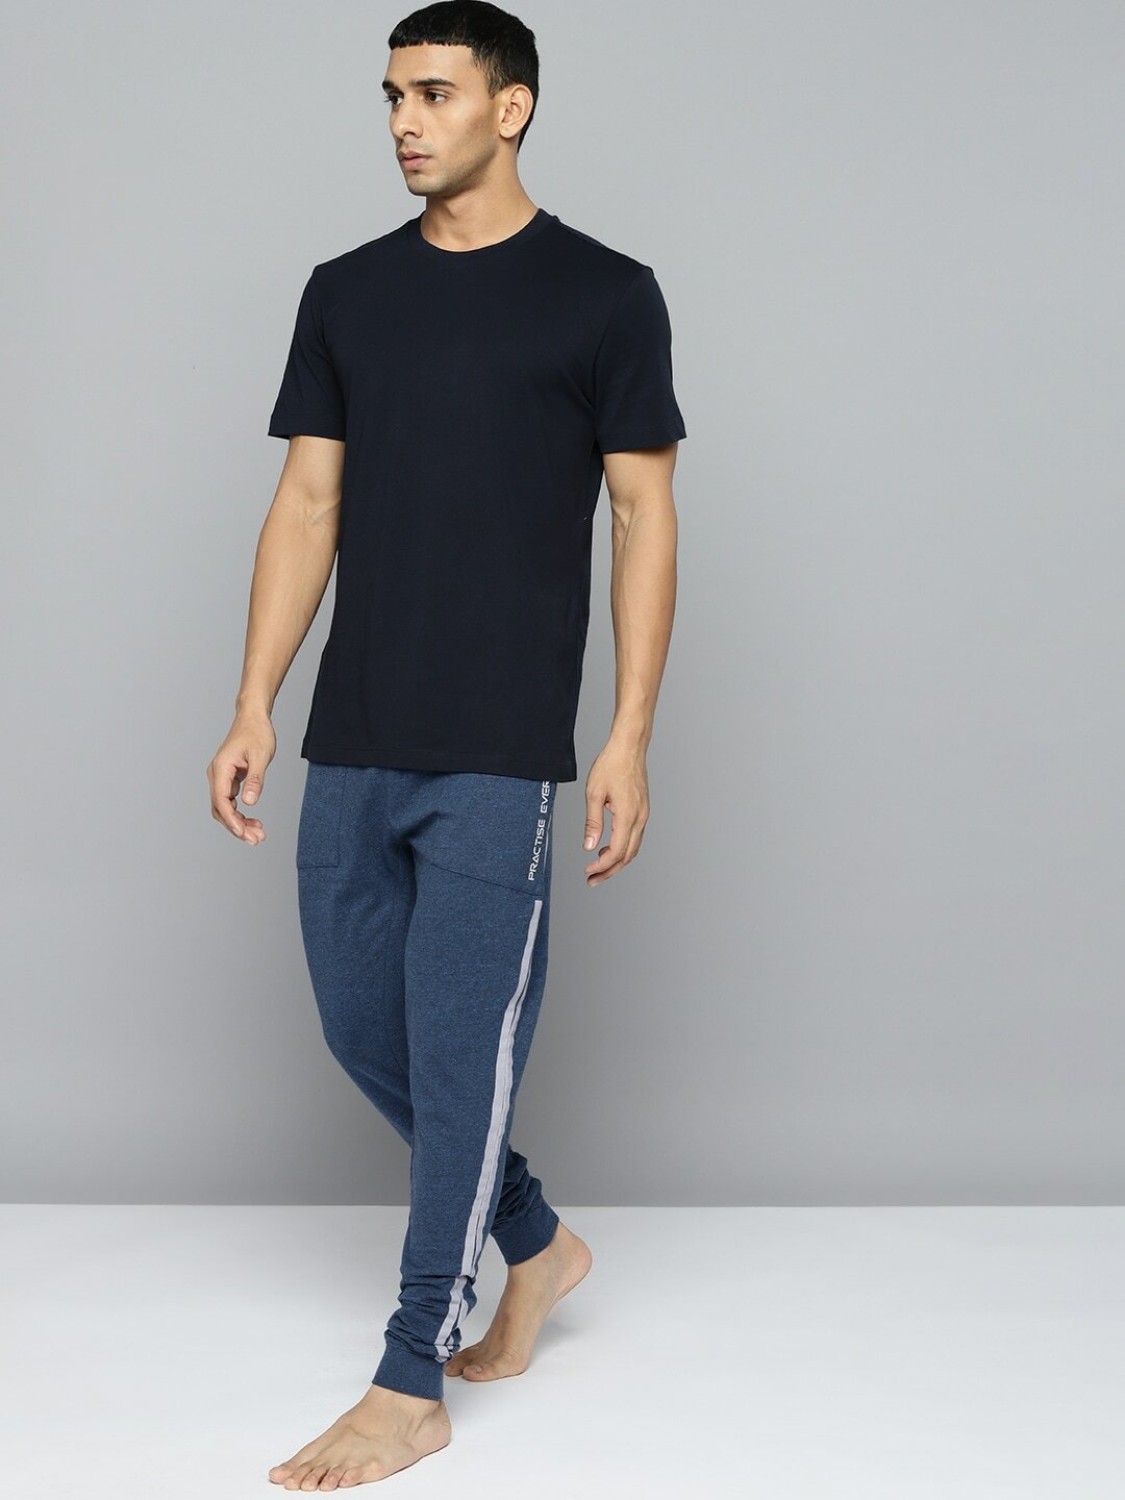 30 OFF on HRX Active by Hrithik Roshan Grey Solid Track Pants on Myntra   PaisaWapascom